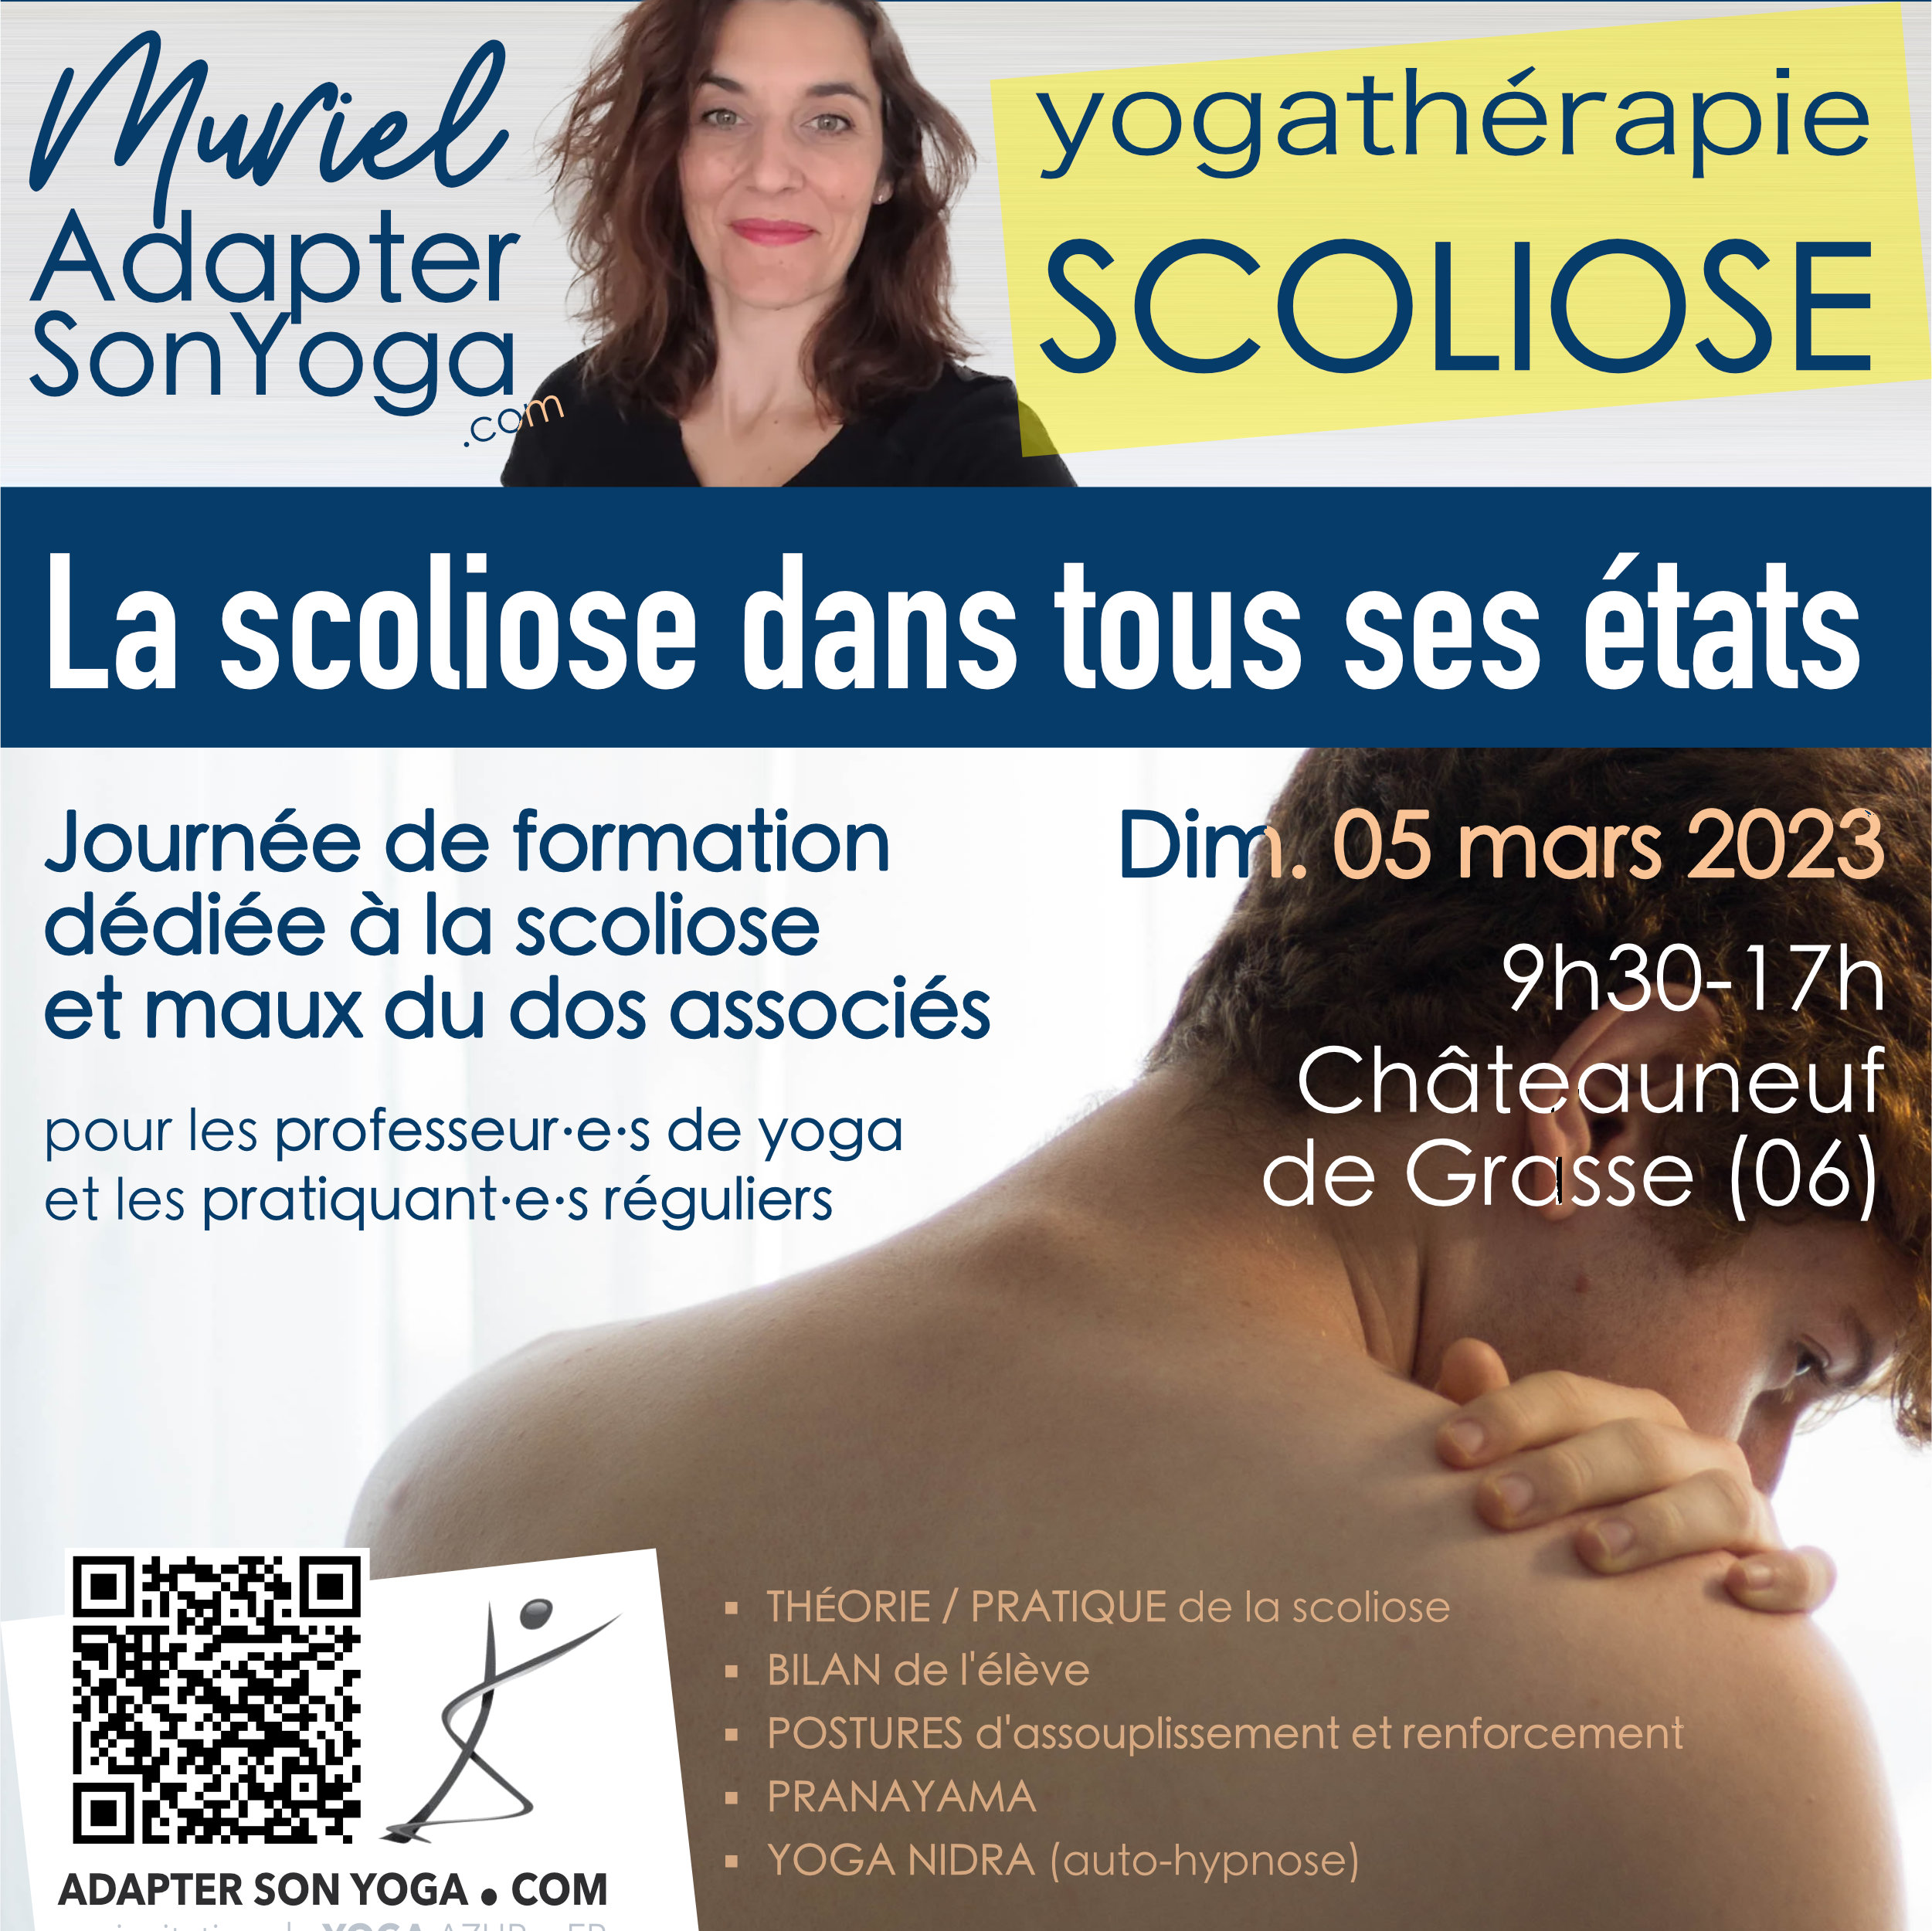 Muriel AdapterSonYoga - Scoliose - formation et stage